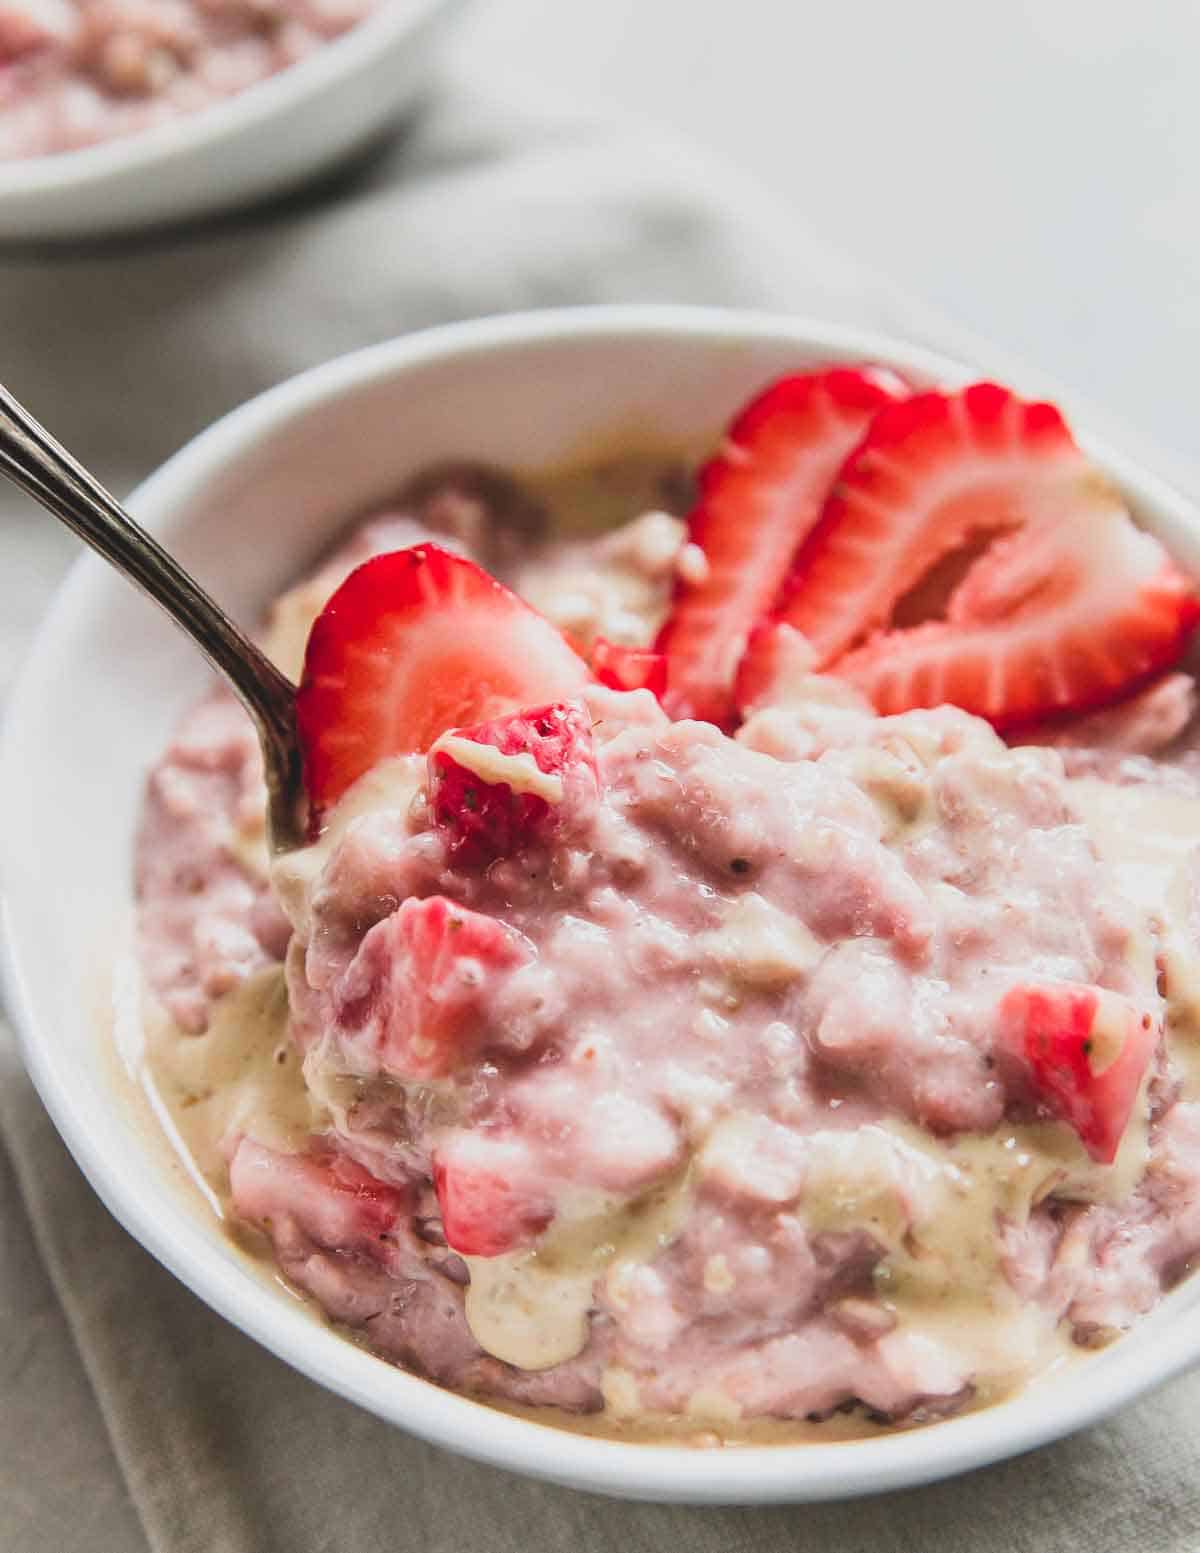 Make oatmeal using fresh strawberries in this easy stove-top recipe.